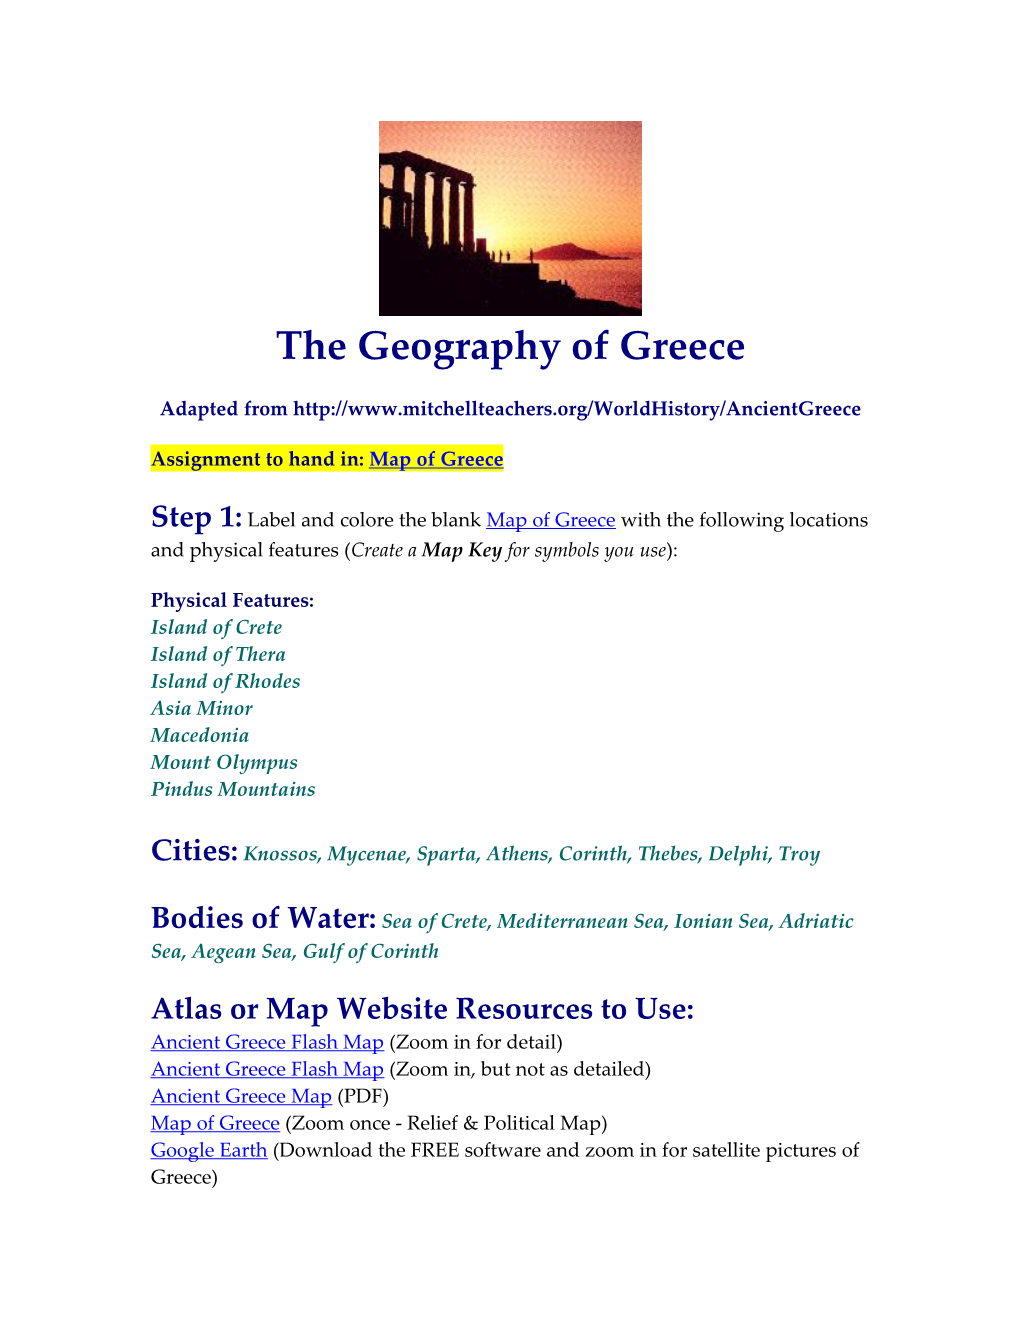 Assignment to Hand In: Map of Greece